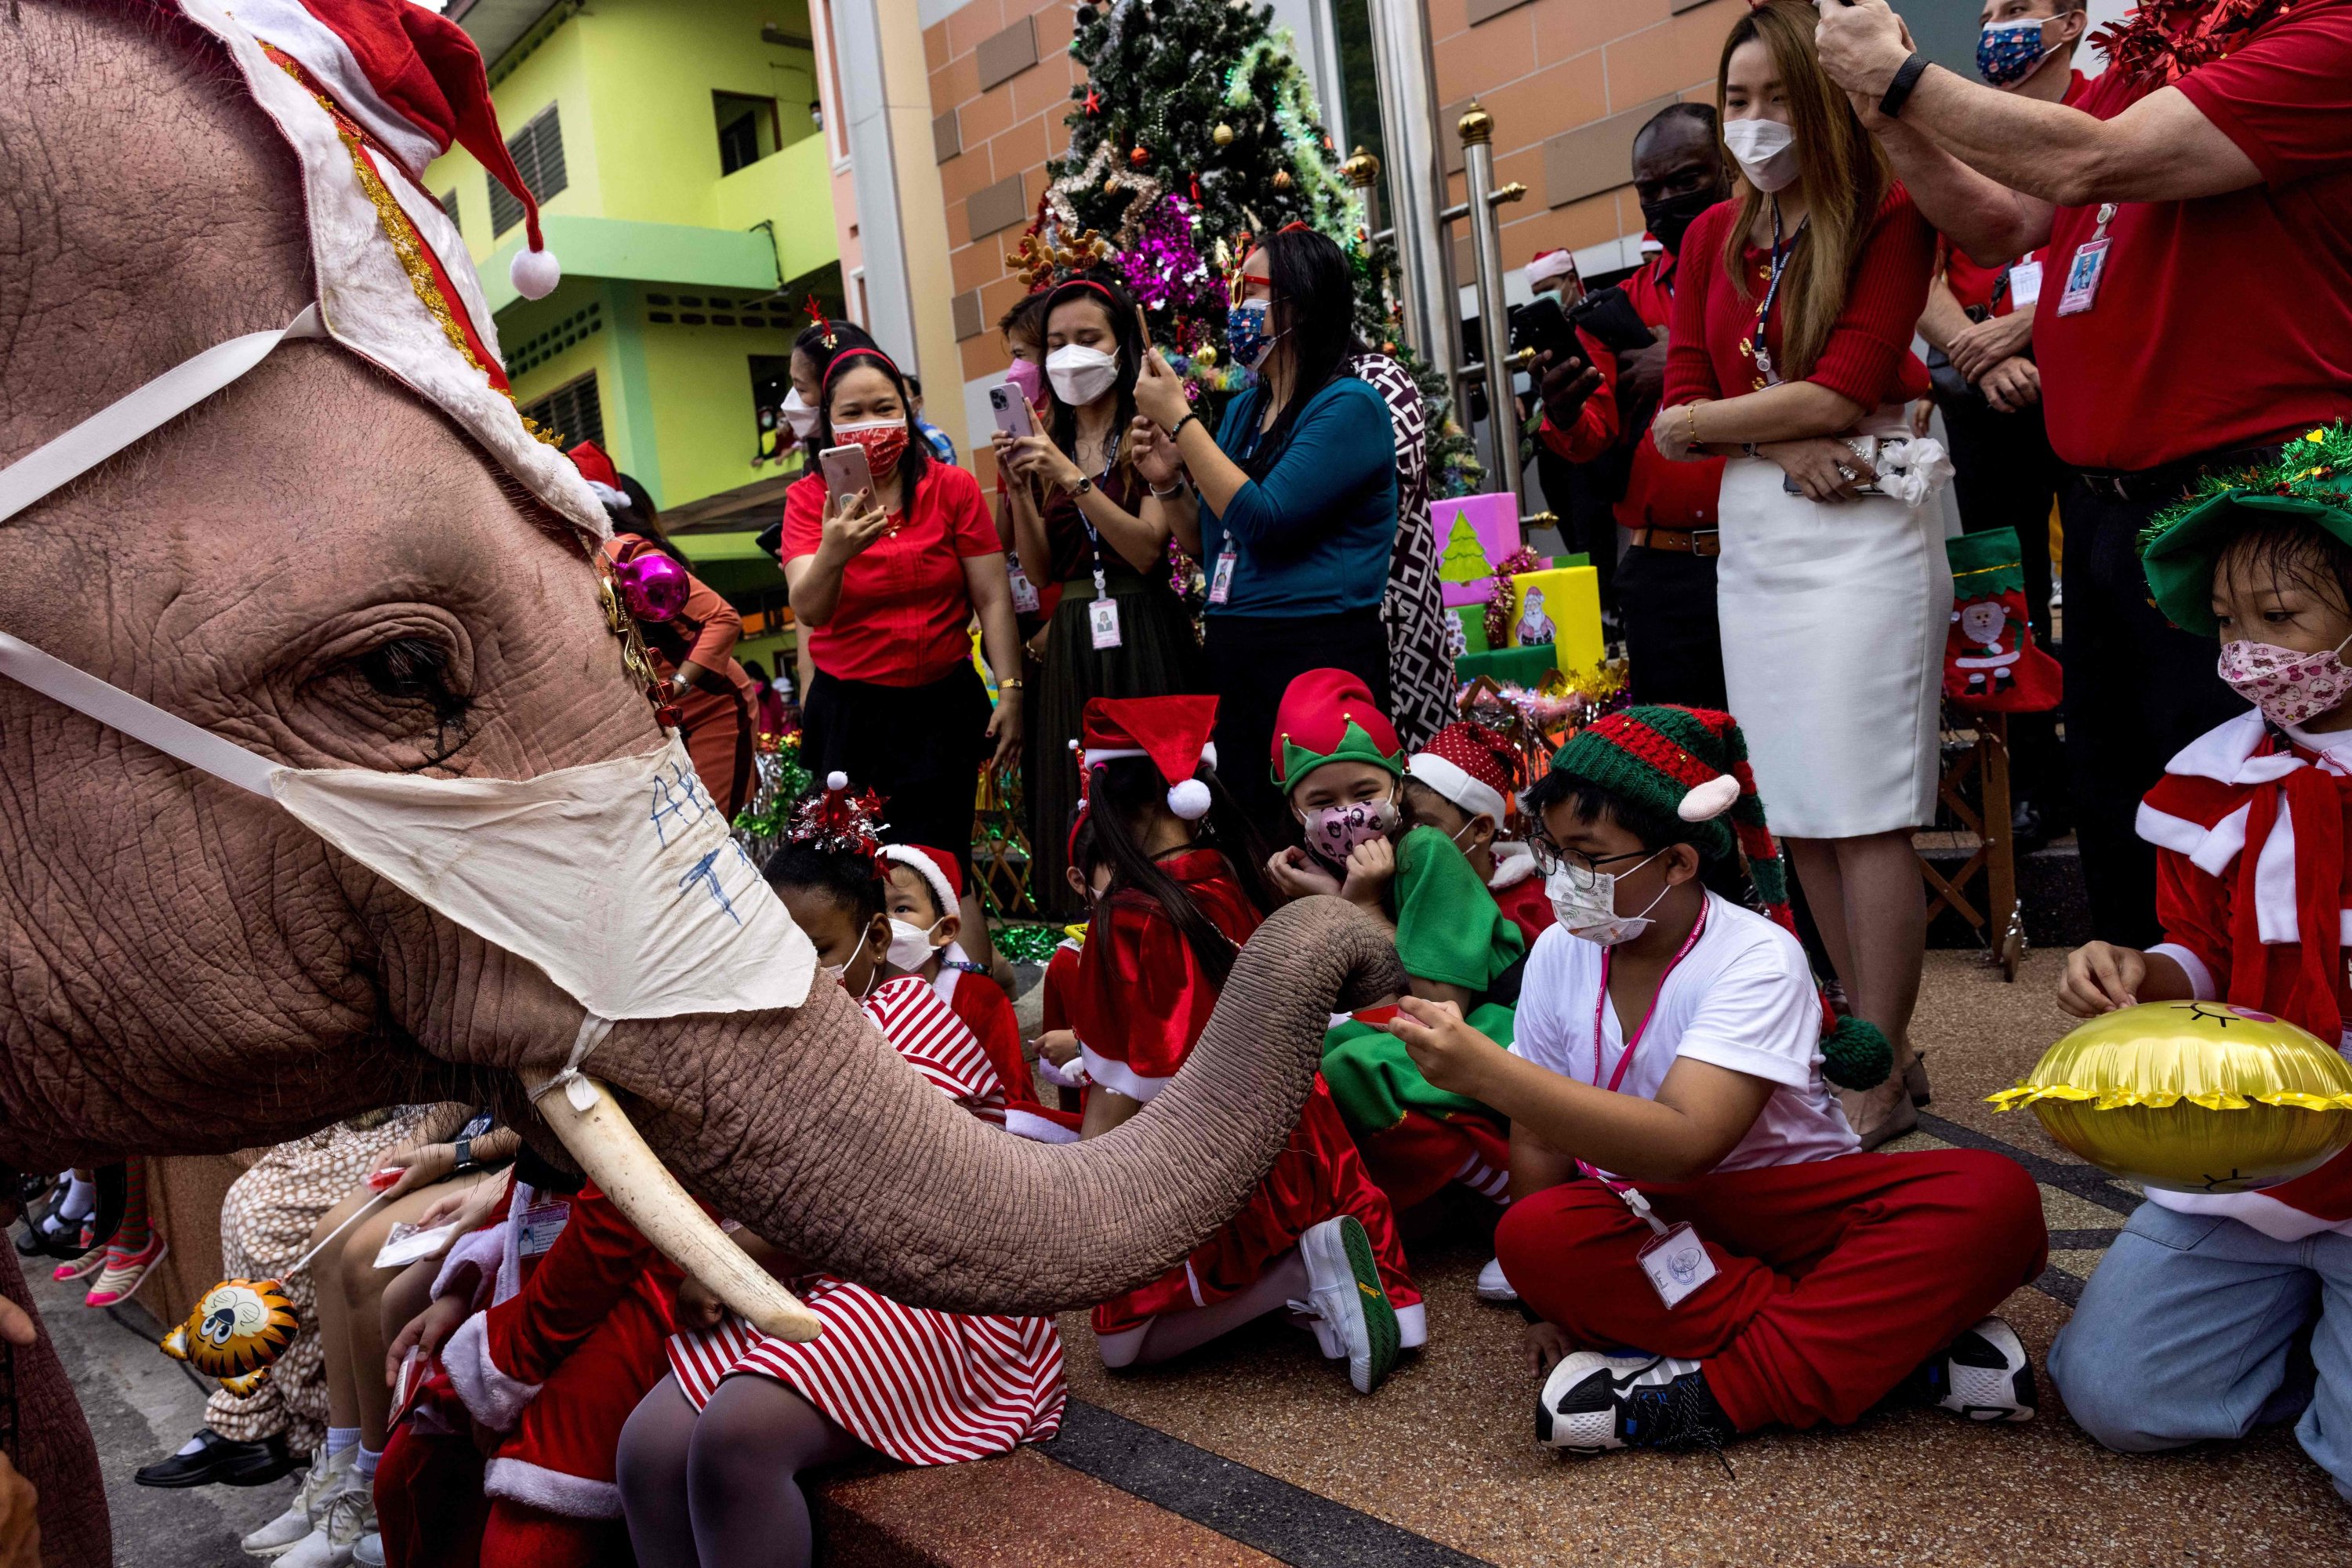 An elephant hands out gifts to children during Christmas celebrations at the Jirasart Witthaya school in Ayutthaya, Thailand, December 24, 2021. (AFP Photo)